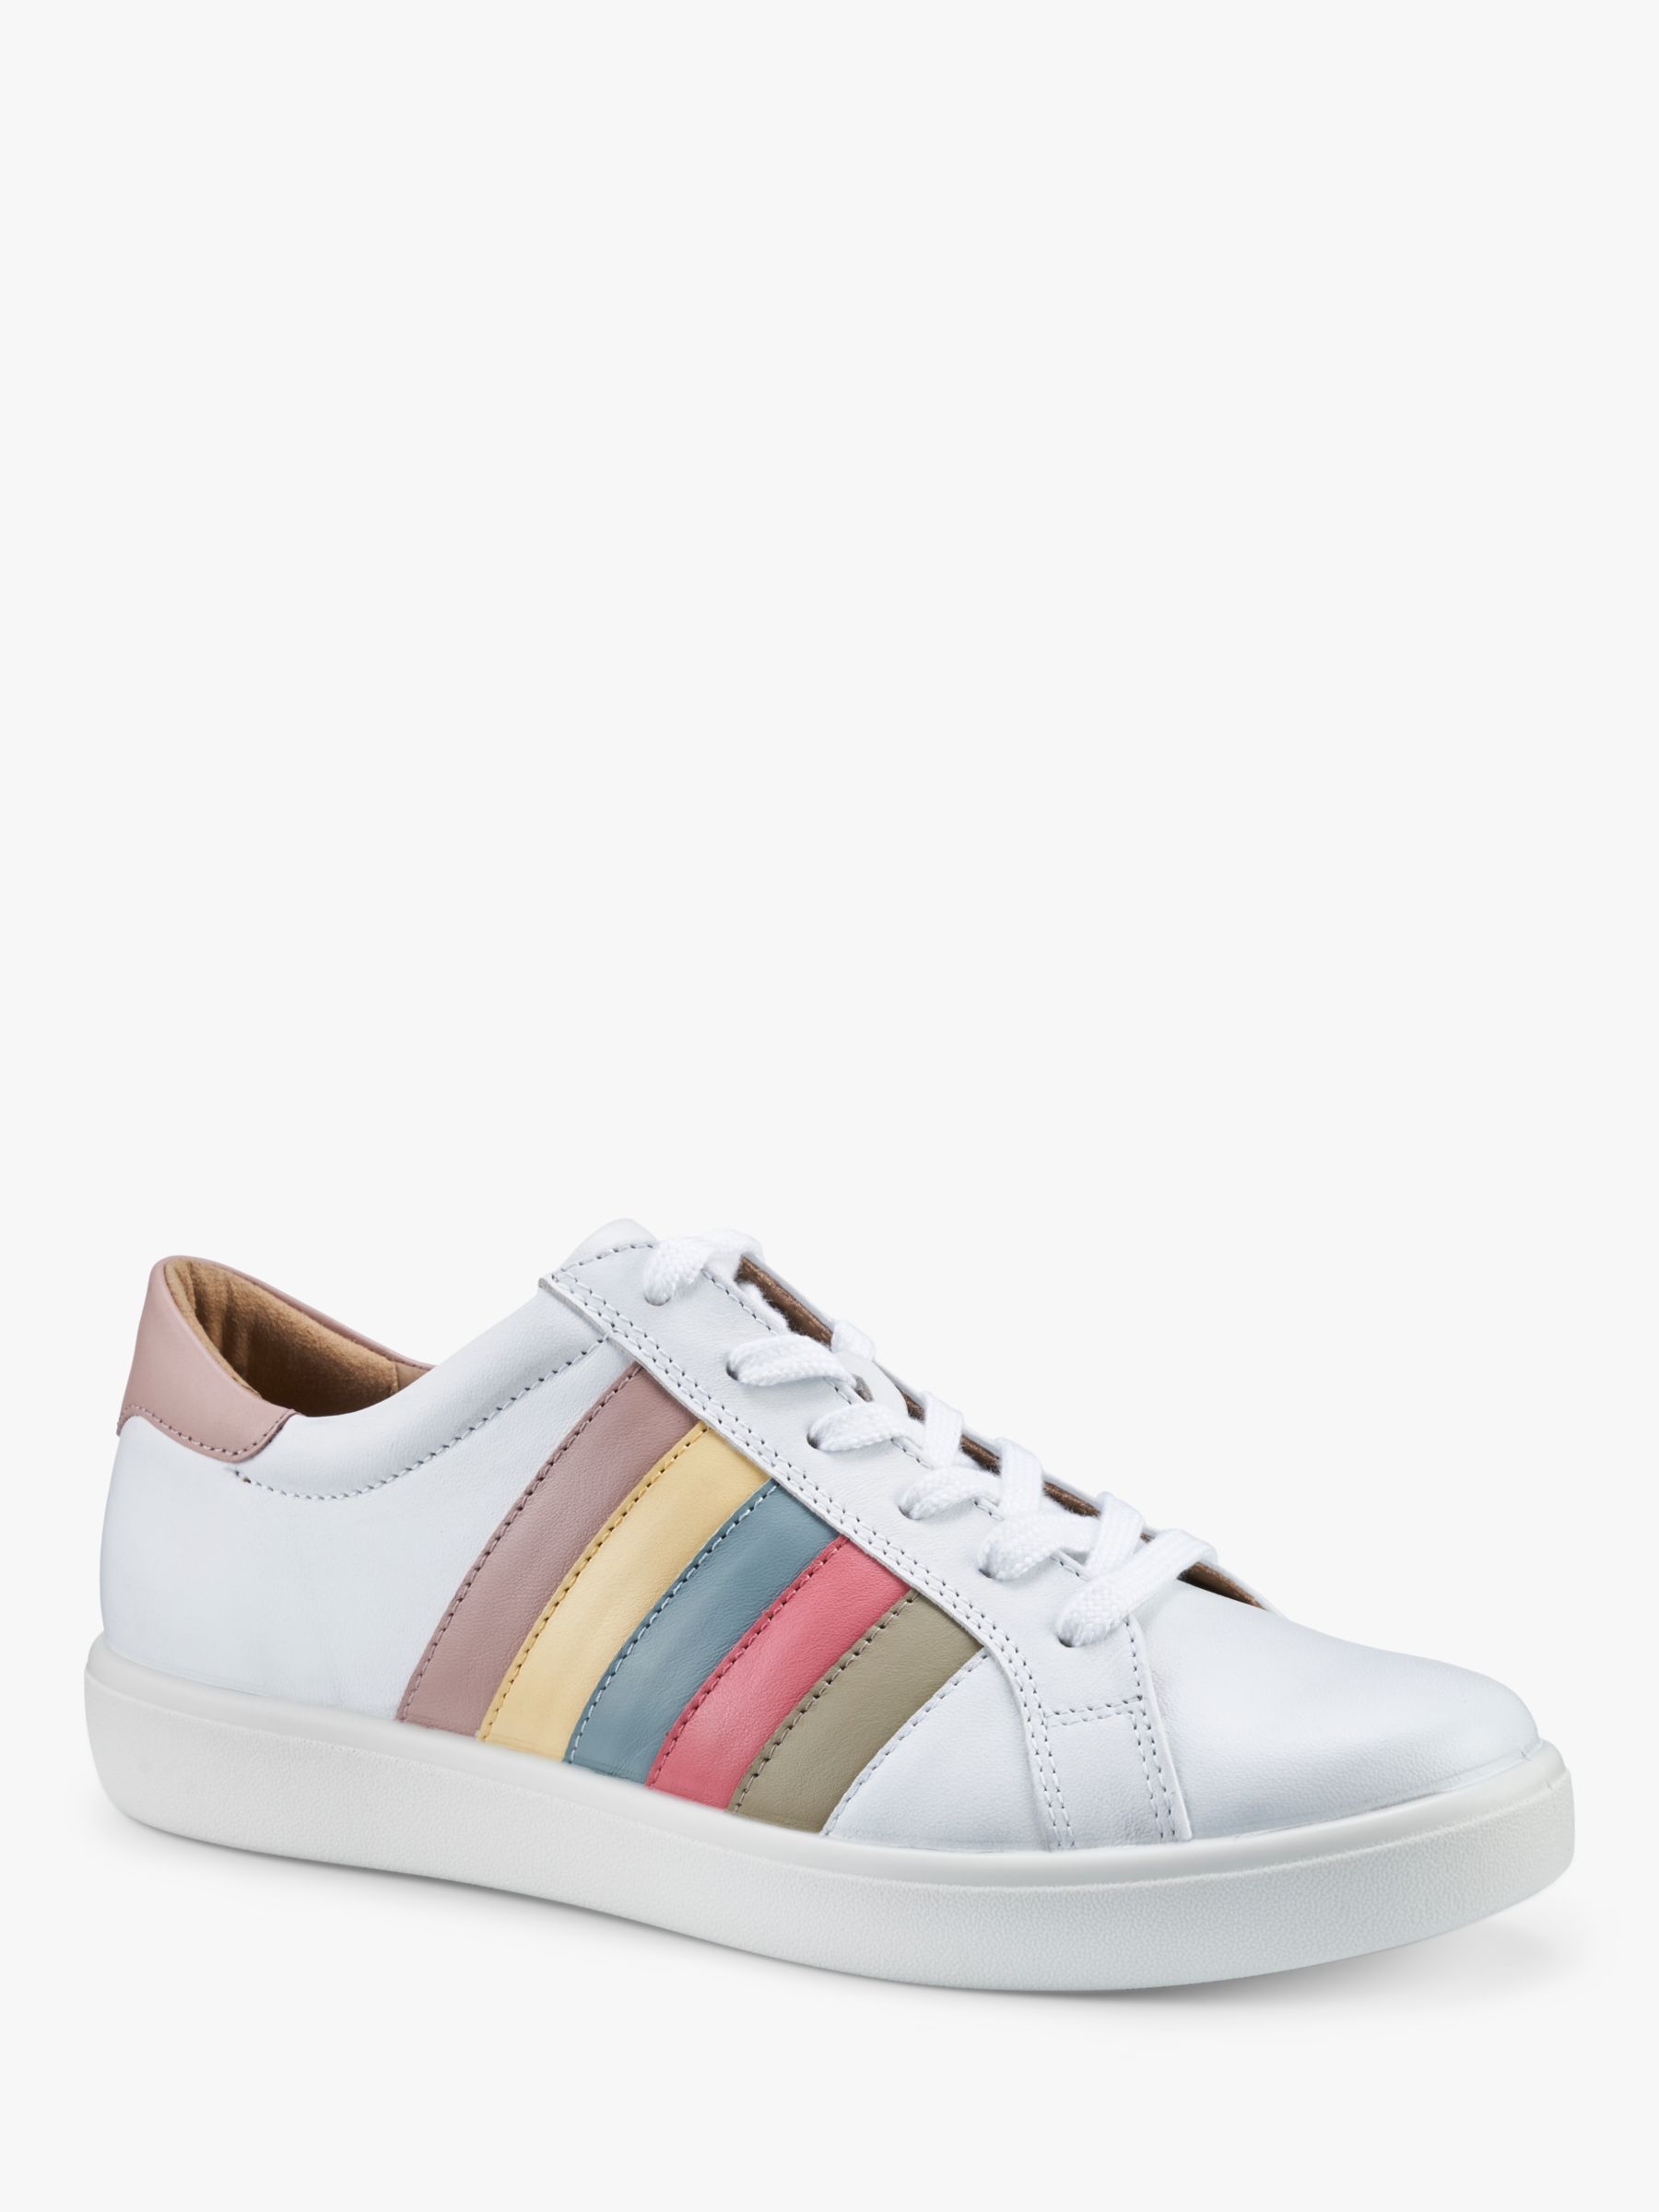 Buy Hotter Switch Leather Trainers Online at johnlewis.com